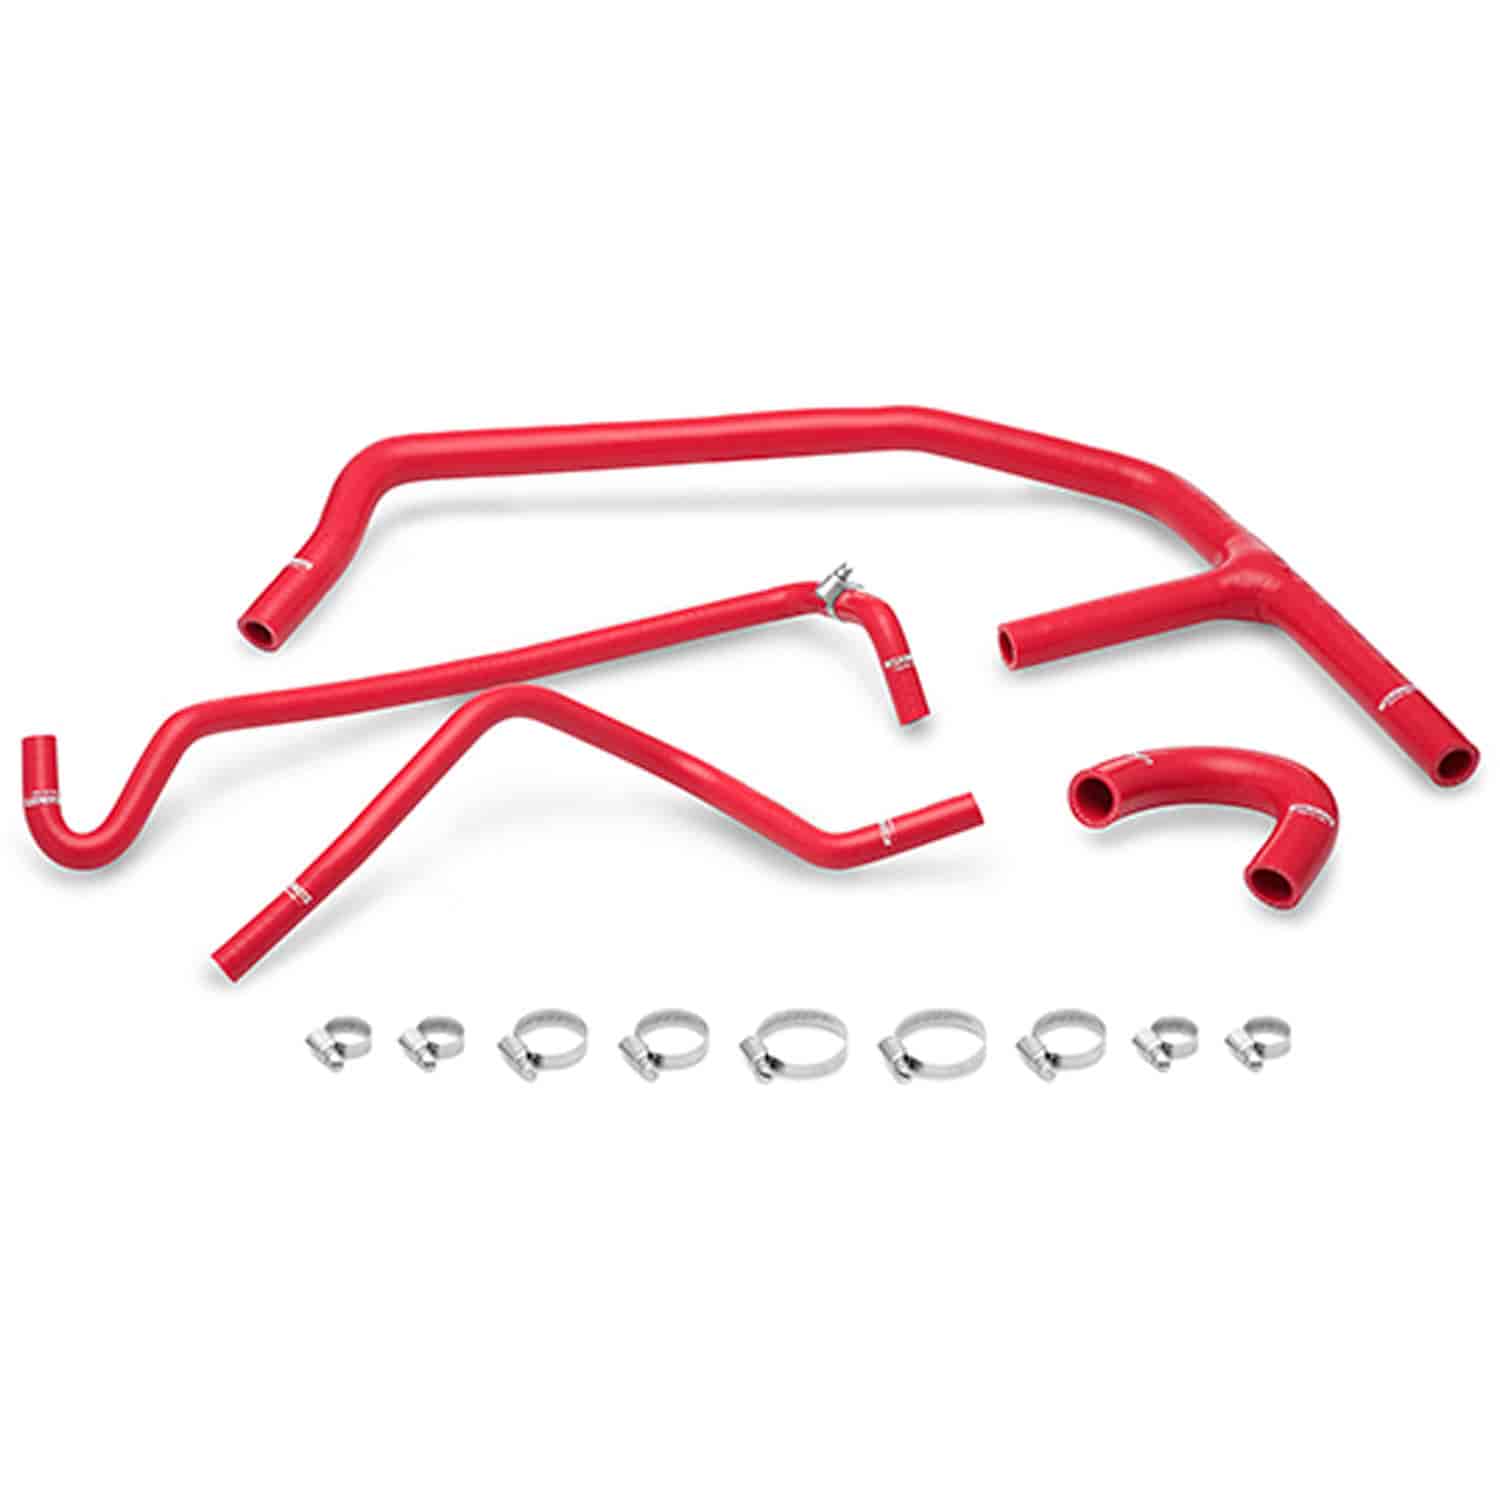 Ford Mustang EcoBoost Silicone Ancillary Hose Kit - MFG Part No. MMHOSE-MUS4-15ANCRD